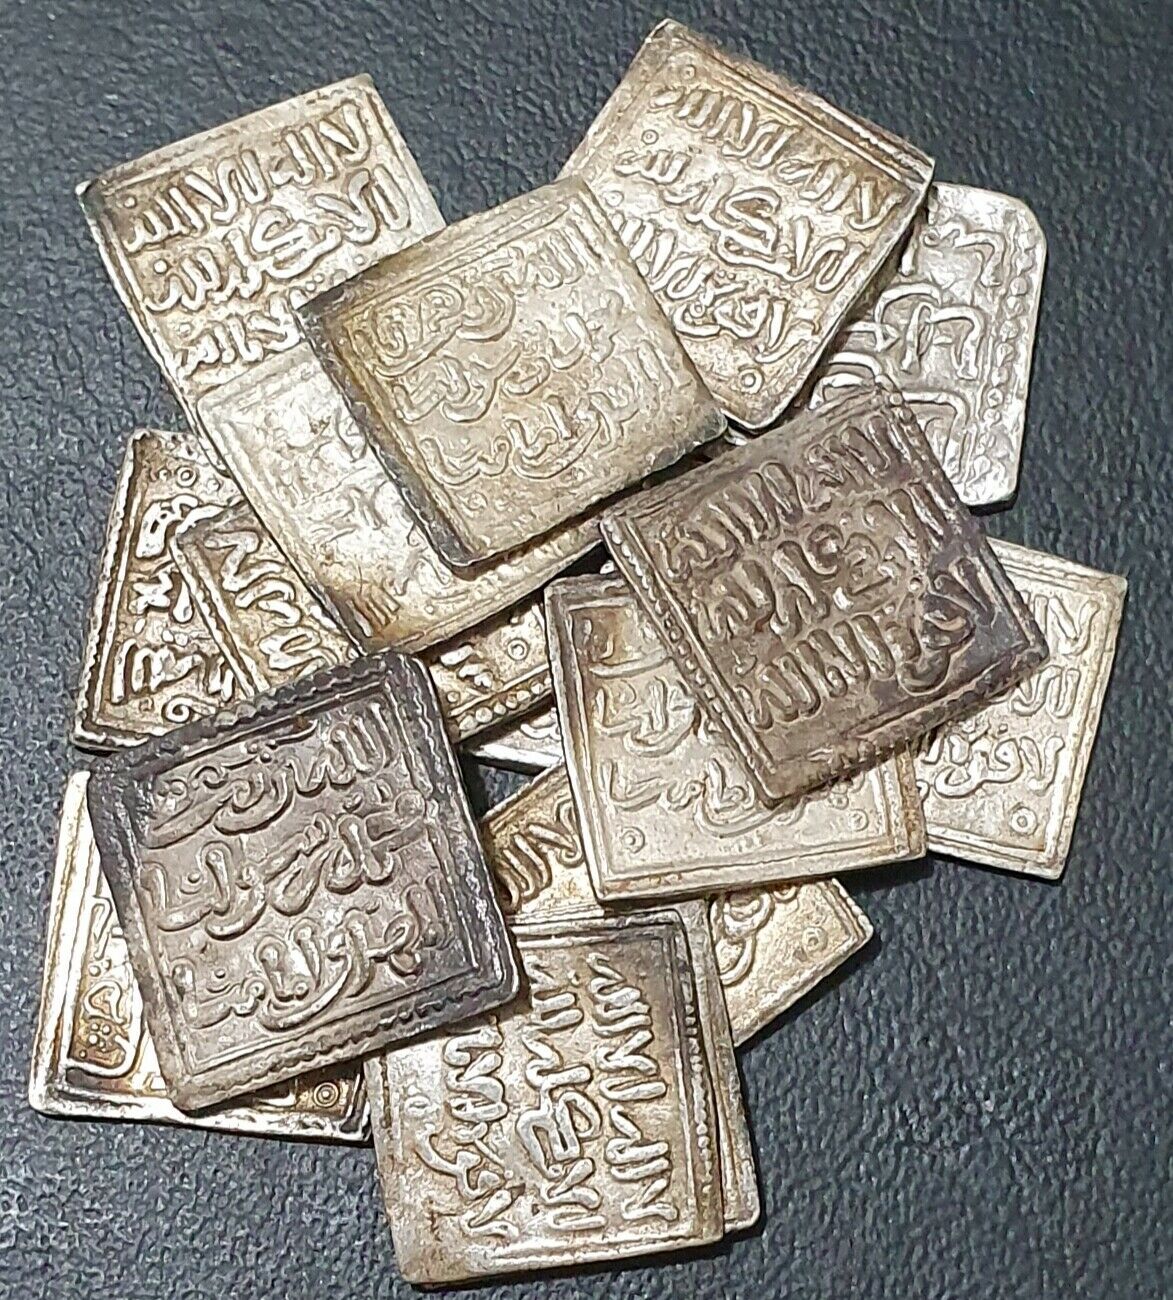 Almohad One Authentic Rare Hammered Silver Coin Antique Square Dirham 13th Ct